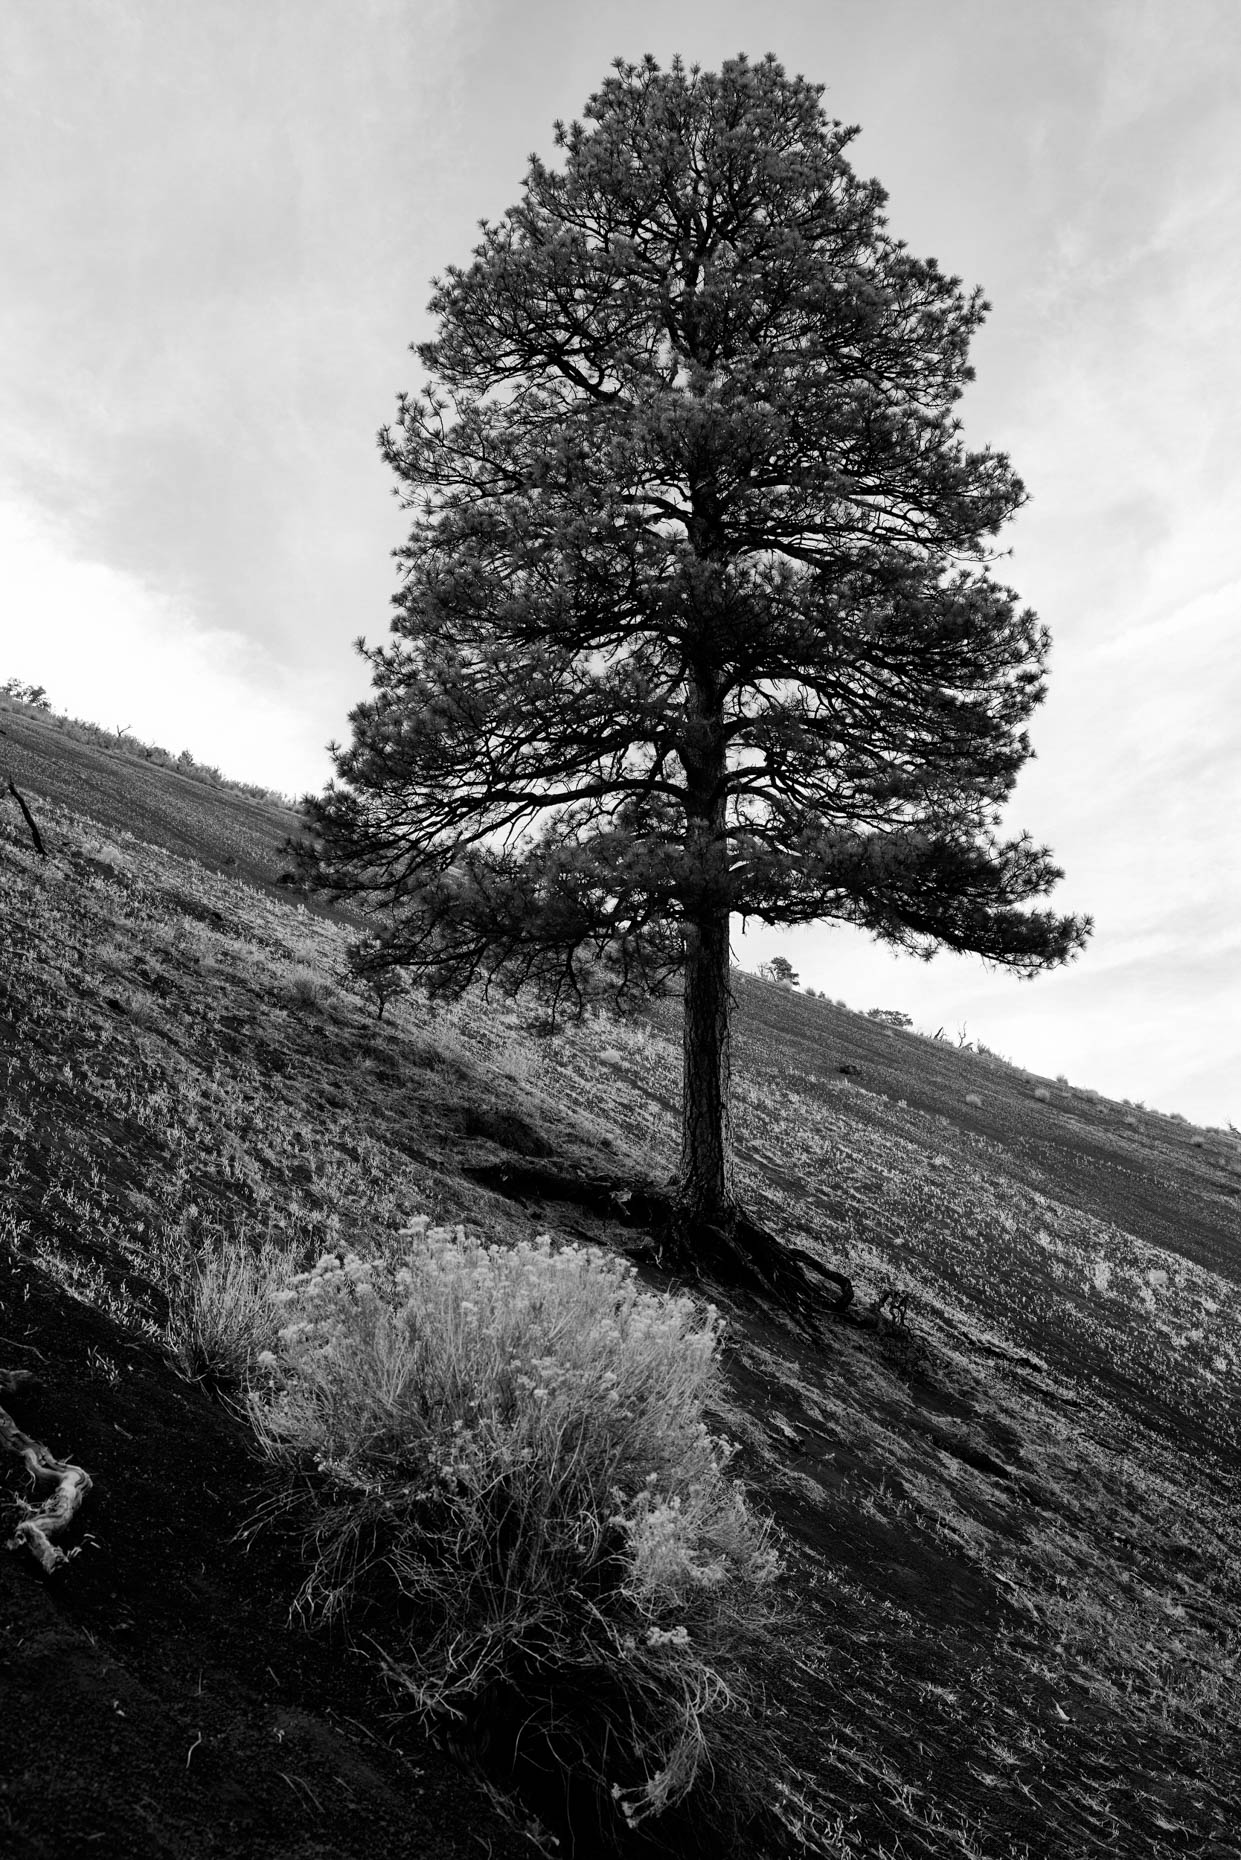 Red Mountain volcanic cindercone- Lone tree on steep incline